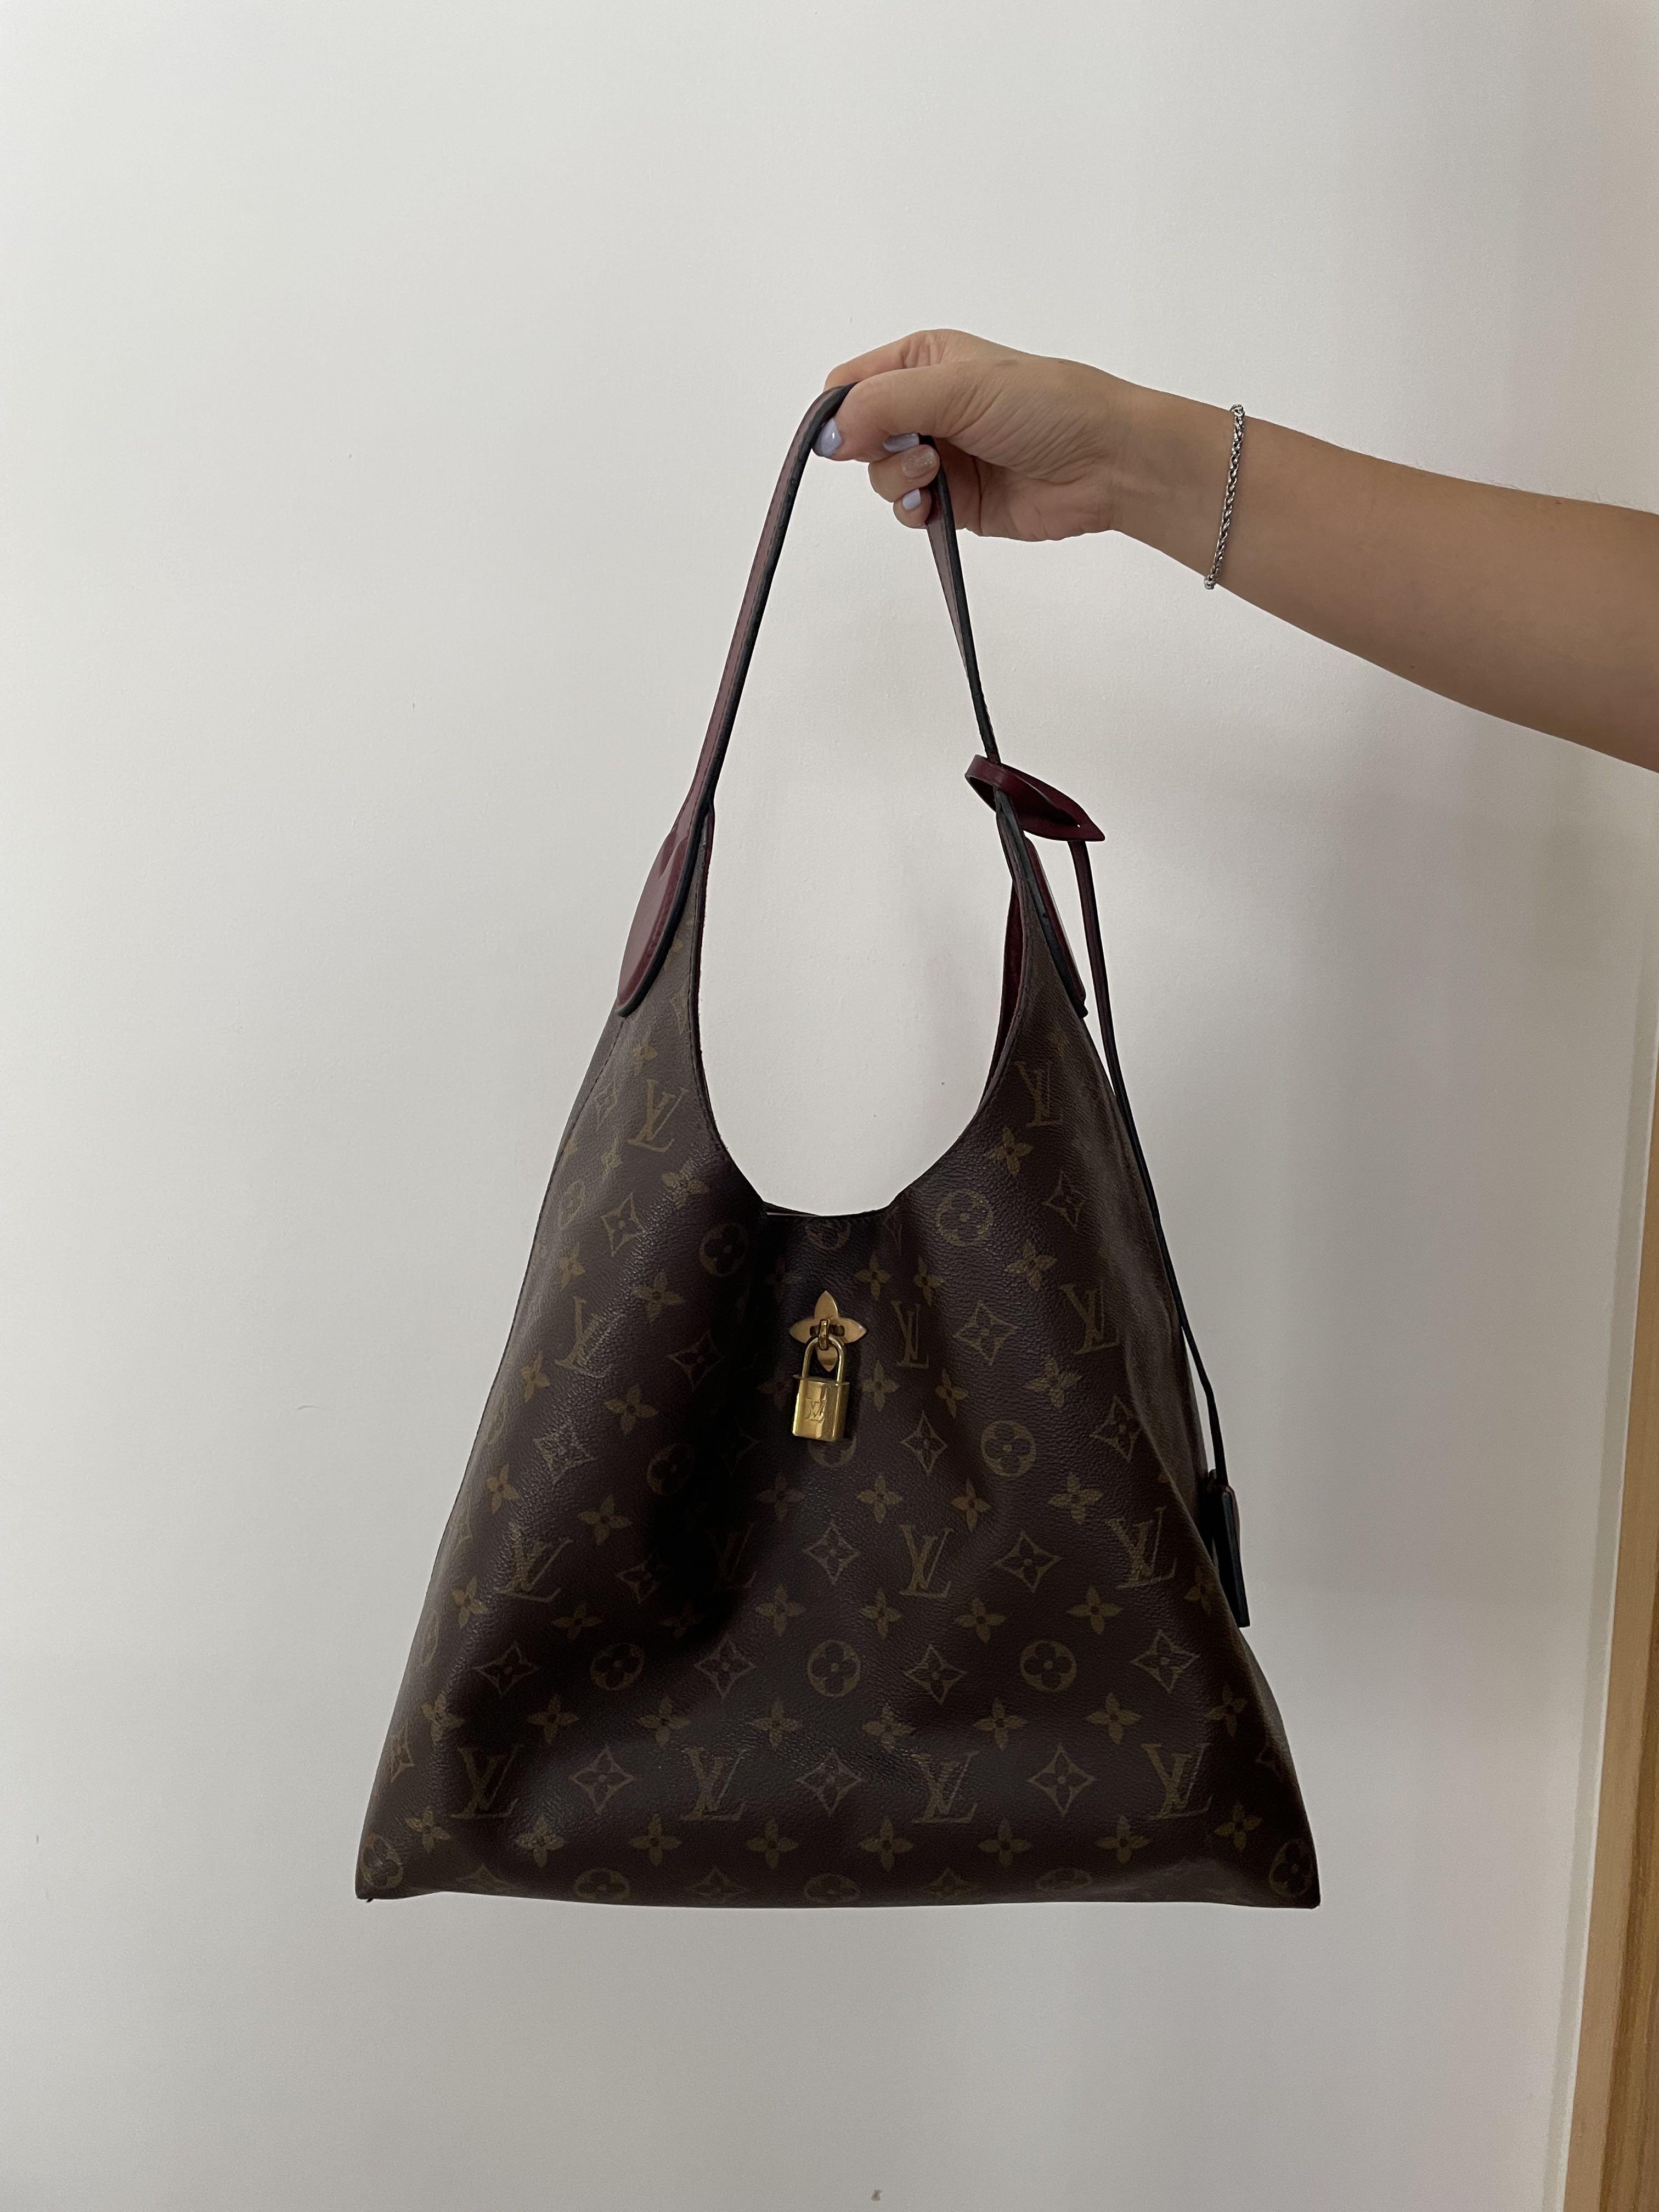 Flower hobo leather handbag Louis Vuitton Brown in Leather - 31319756